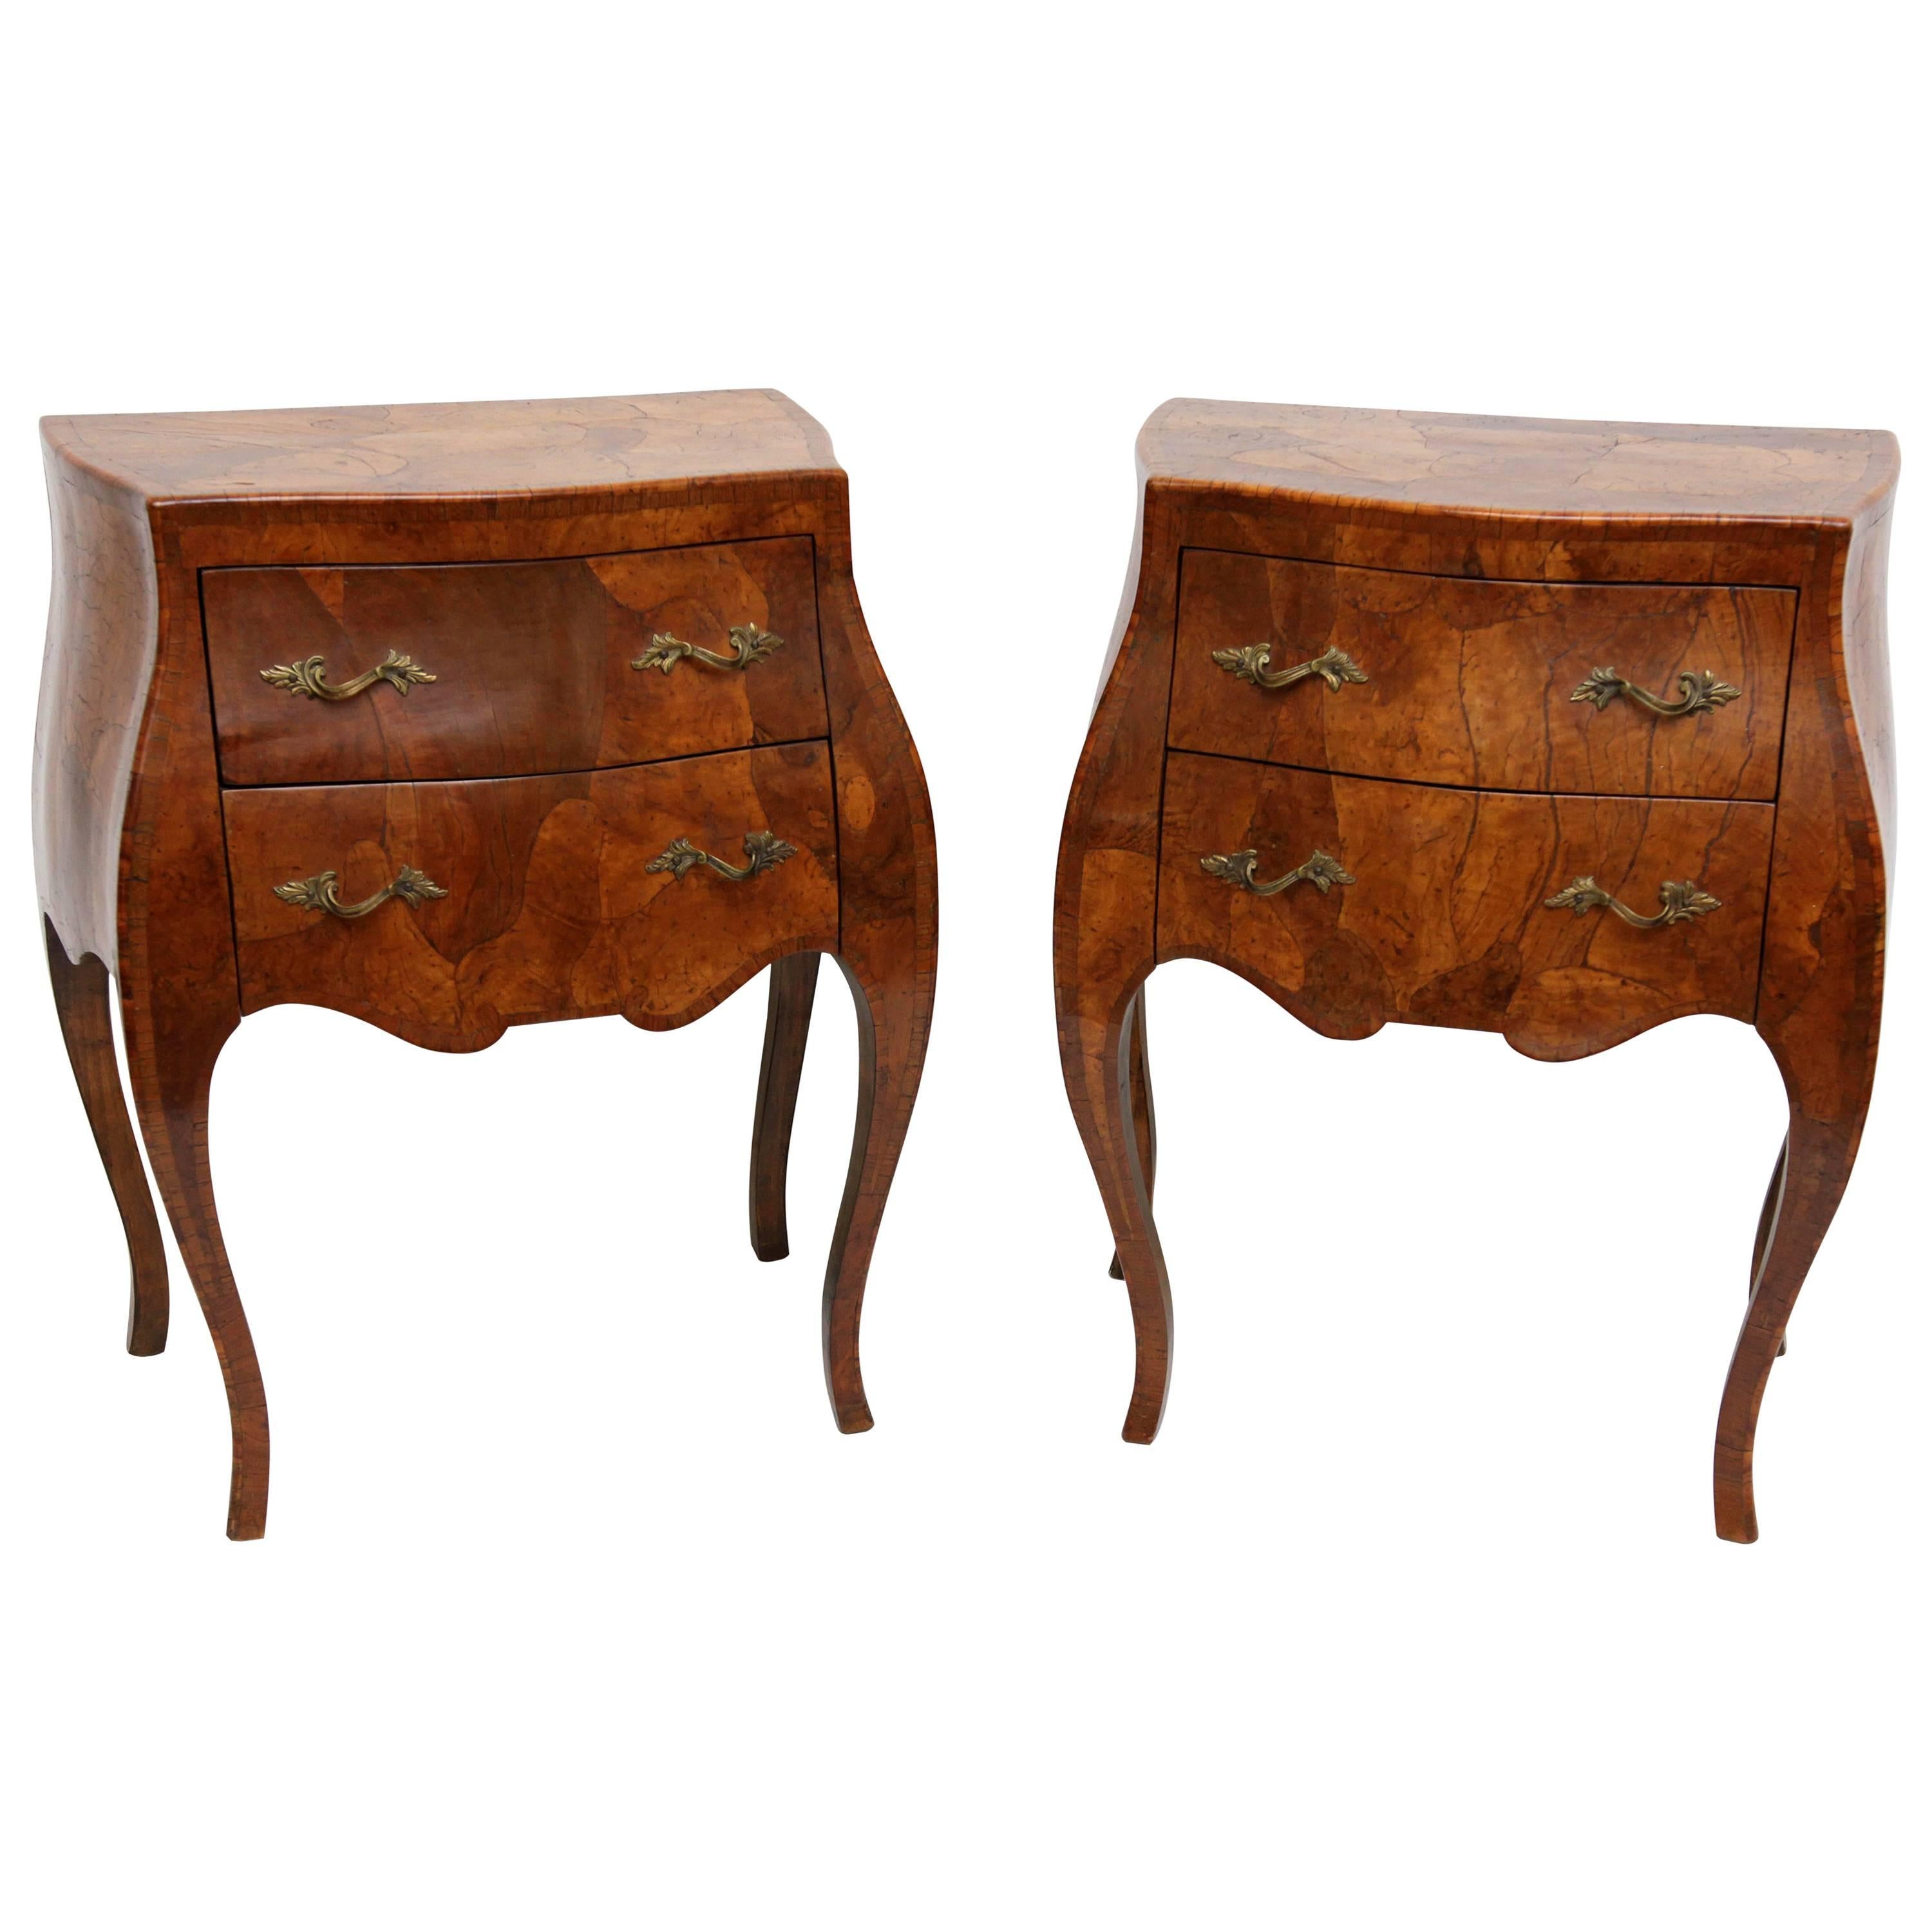 Italian Provencal Bombe Two-Drawer Side Tables